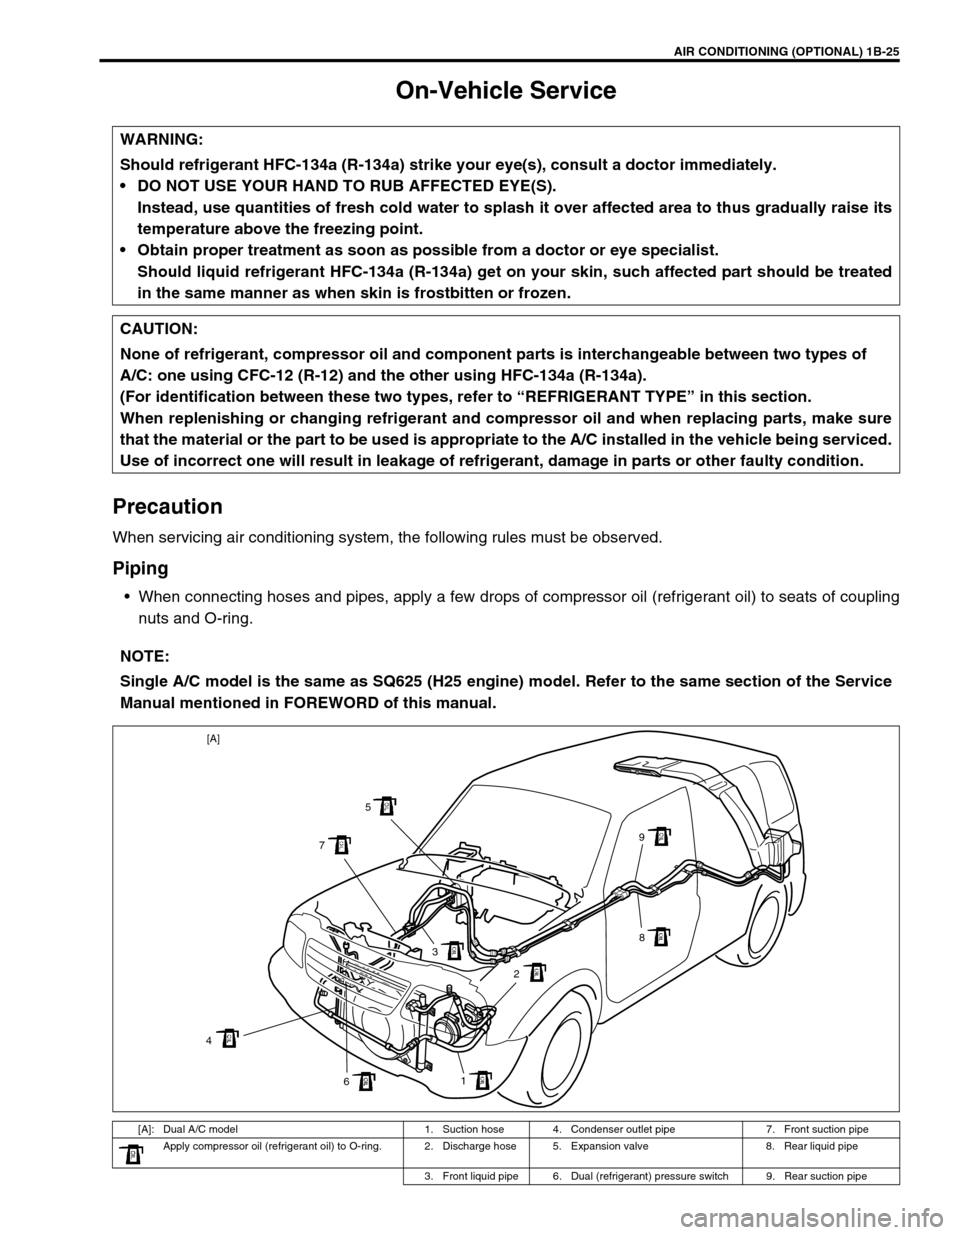 SUZUKI GRAND VITARA 1999 2.G Service Manual AIR CONDITIONING (OPTIONAL) 1B-25
On-Vehicle Service
Precaution
When servicing air conditioning system, the following rules must be observed.
Piping
When connecting hoses and pipes, apply a few drops